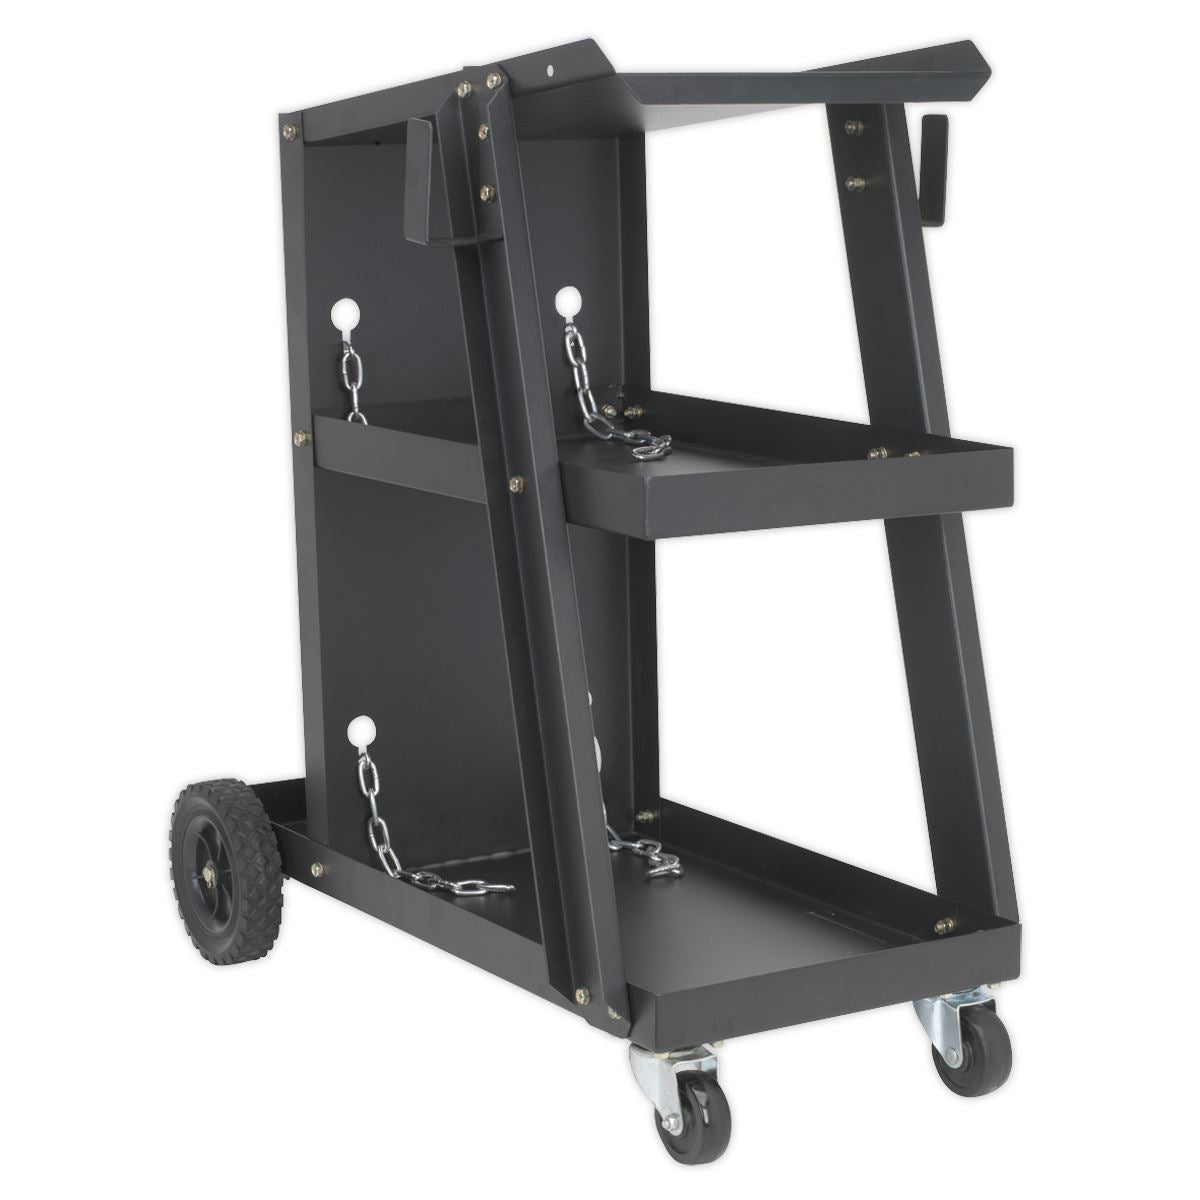 Sealey Universal Trolley for Portable MIG Welders